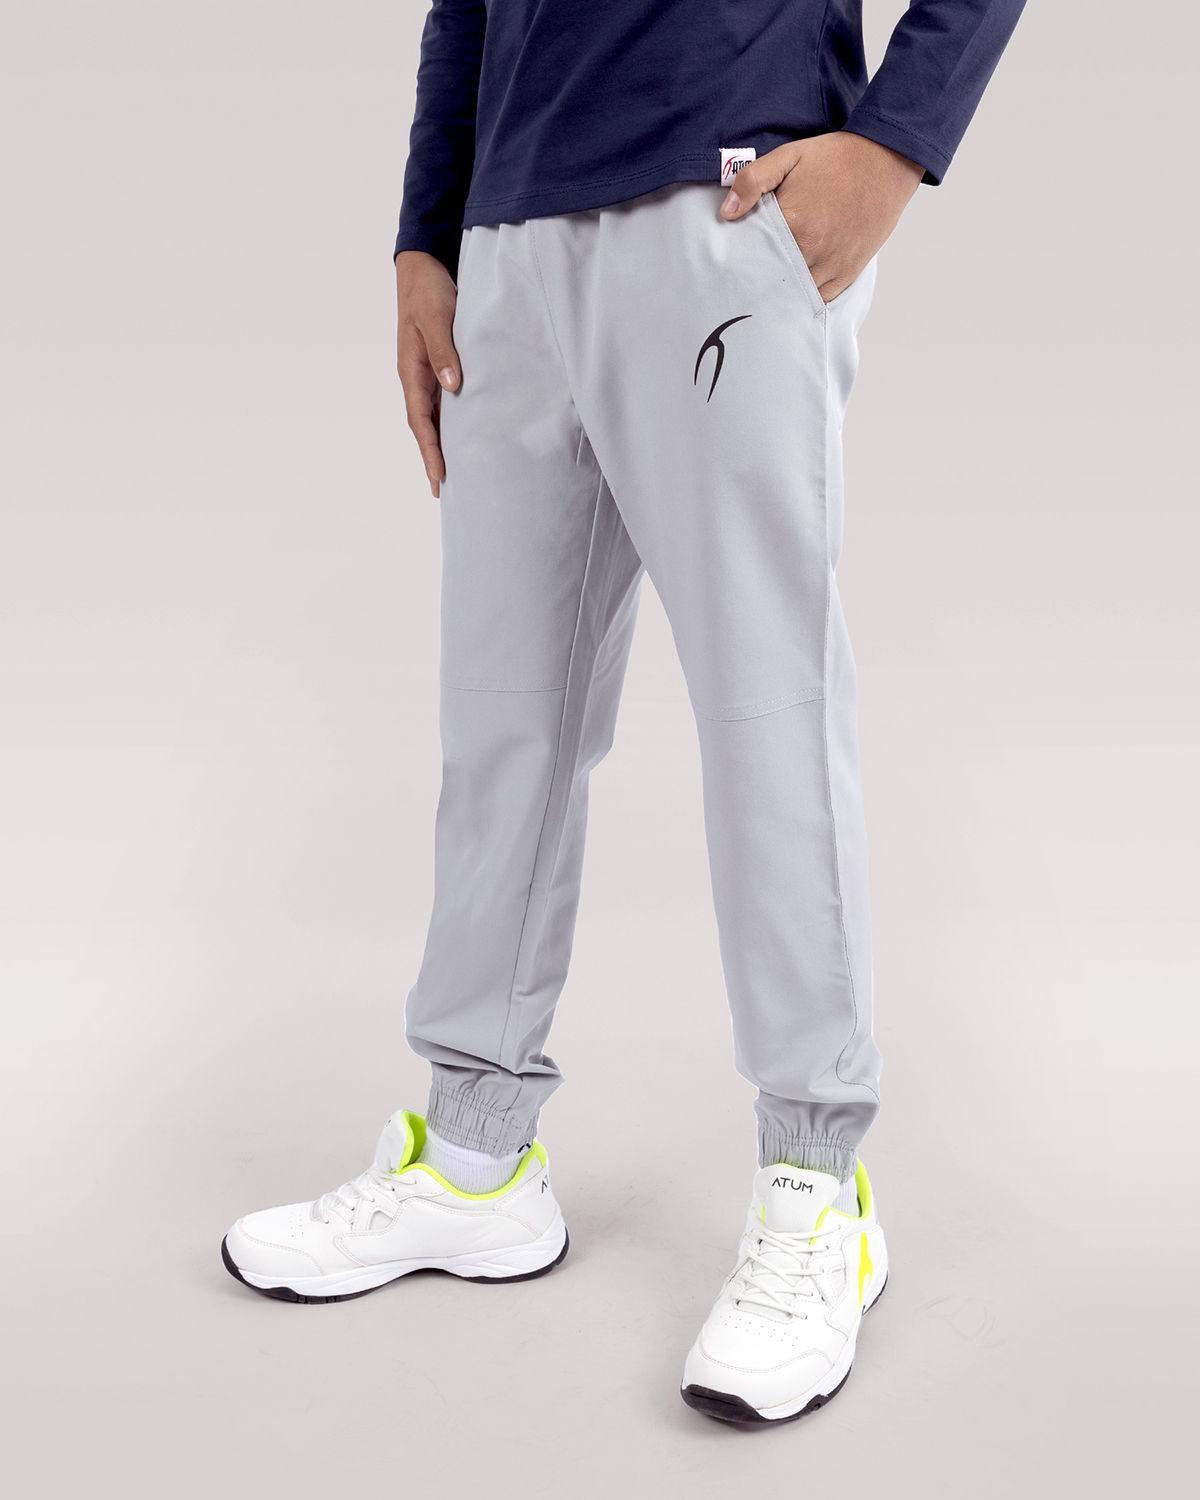 Photo by 𝗔𝗧𝗨ð�— SPORTSWEAR ® on December 20, 2022. May be an image of 1 boy wears a gray sweatpants and a white shoes.